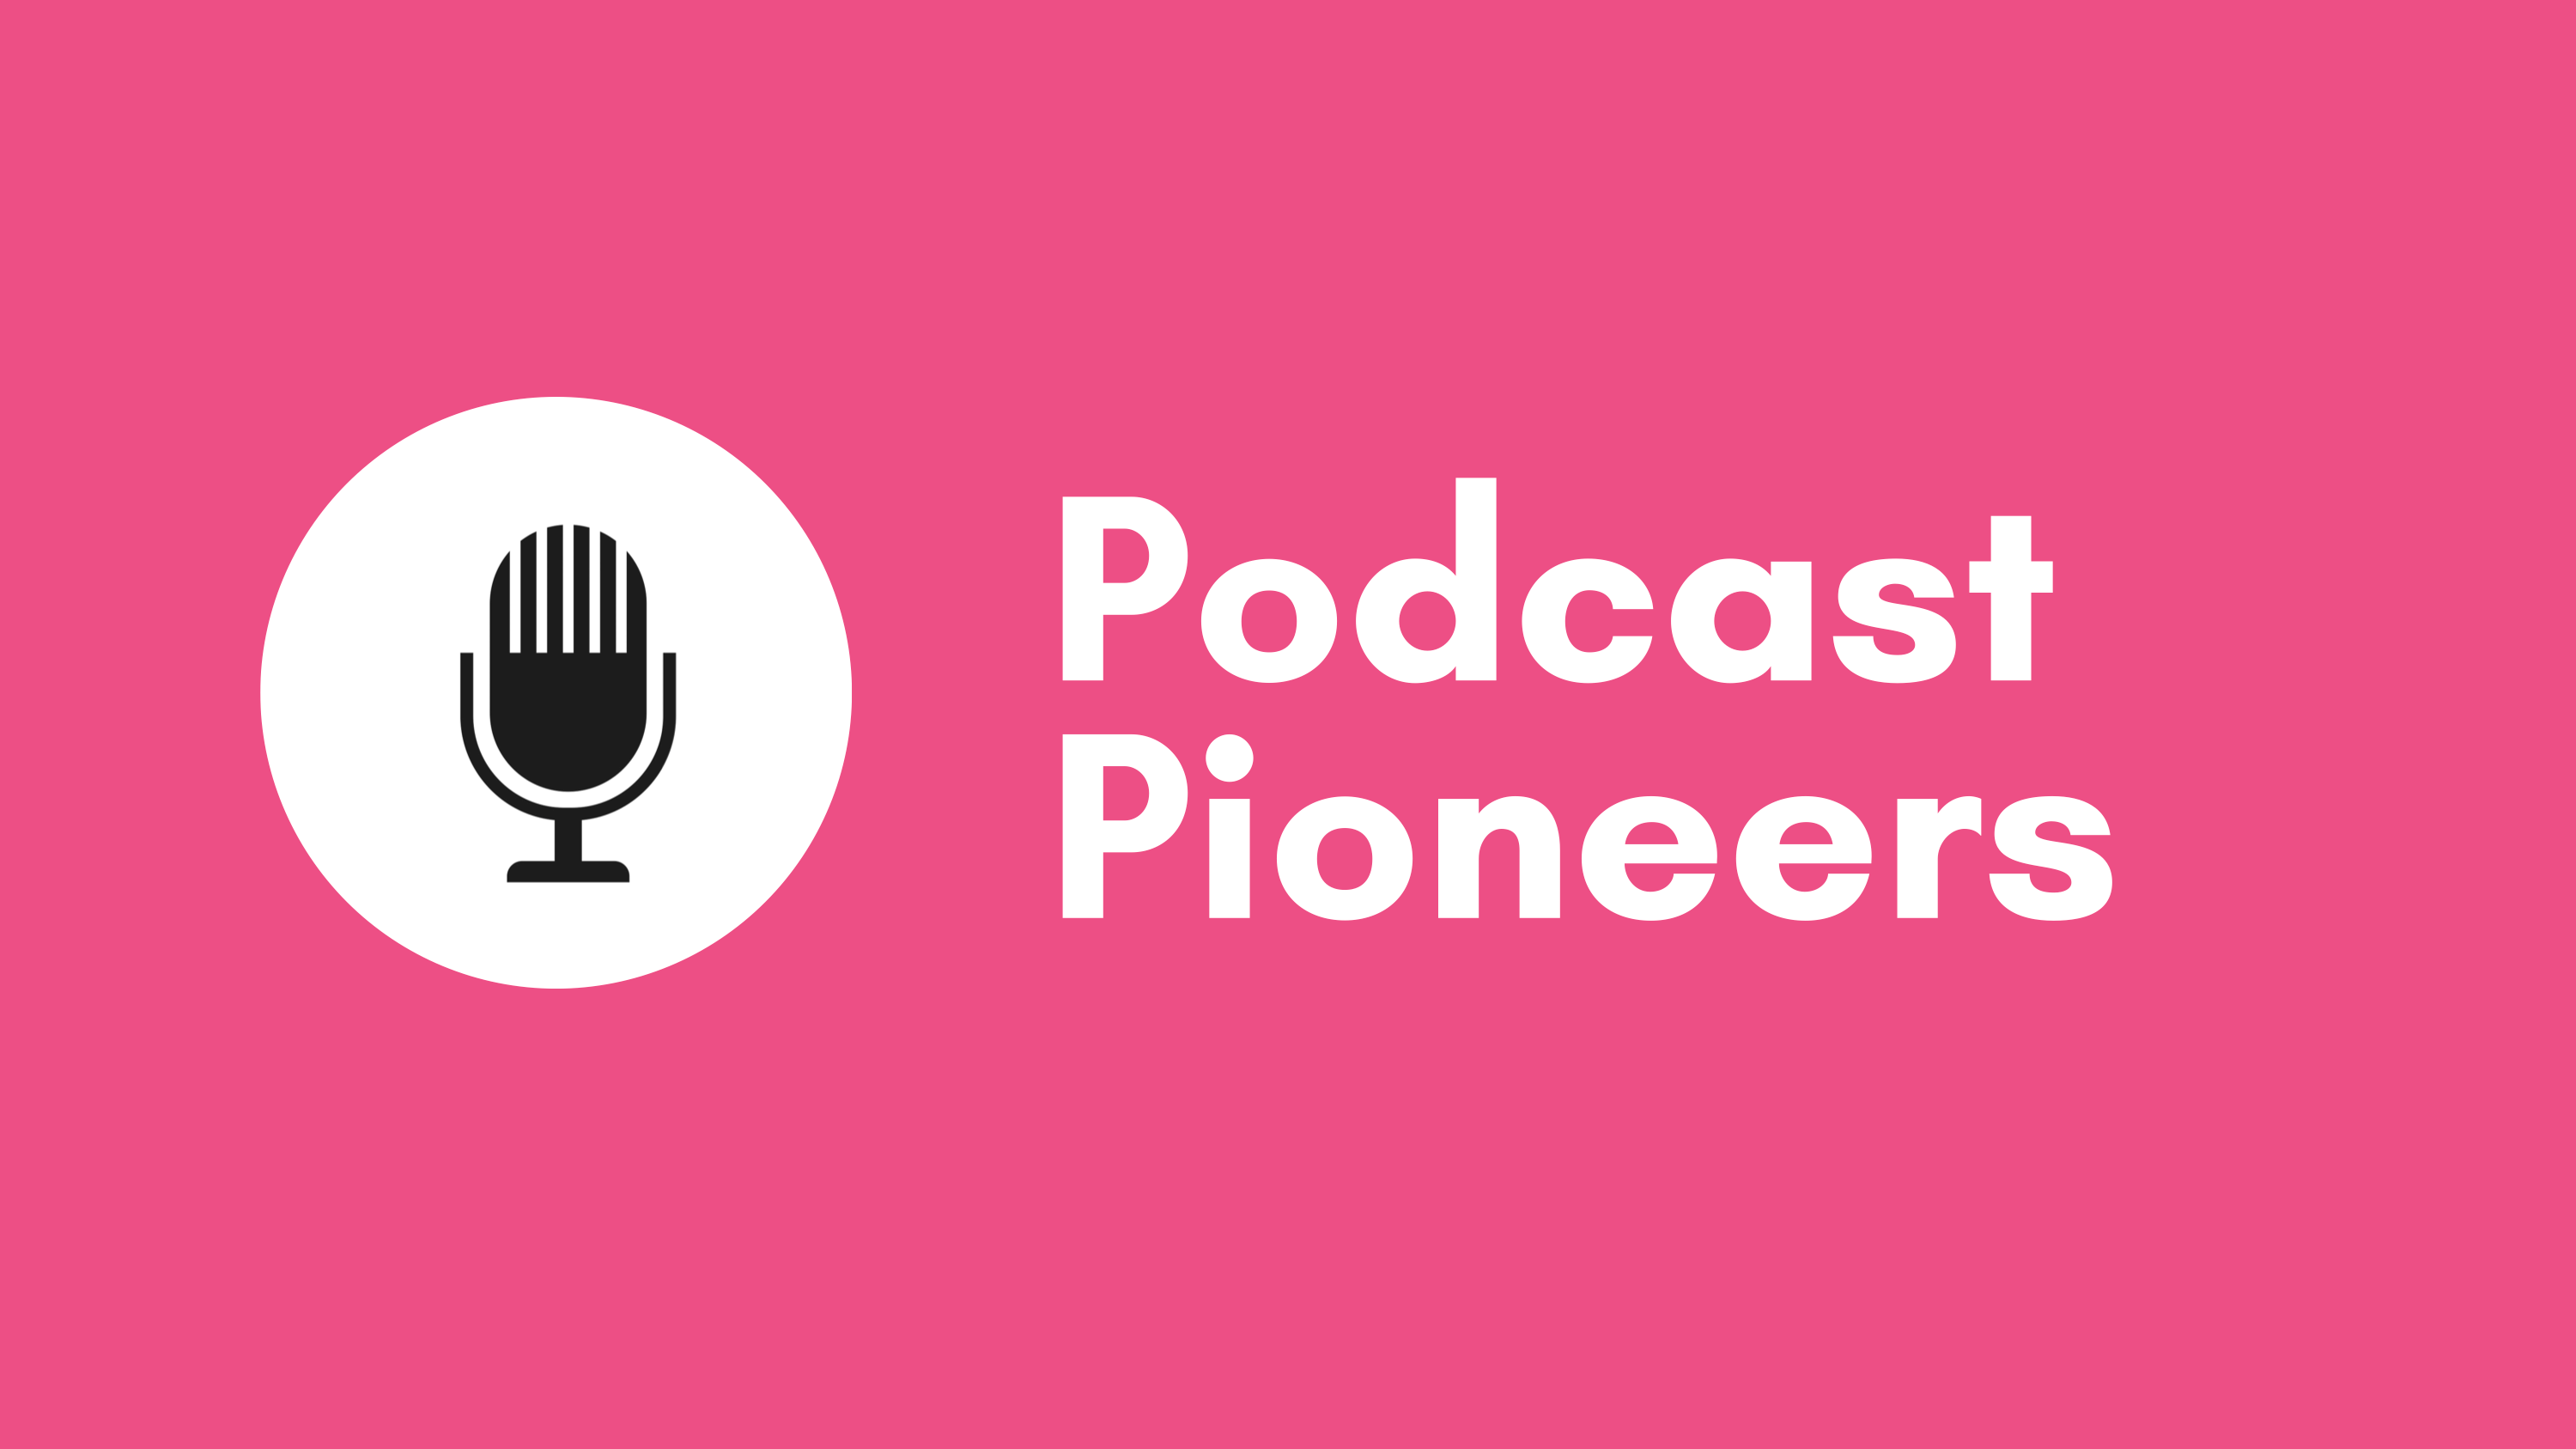 From Lightbulb moment to Listener: The power of strategic podcast production